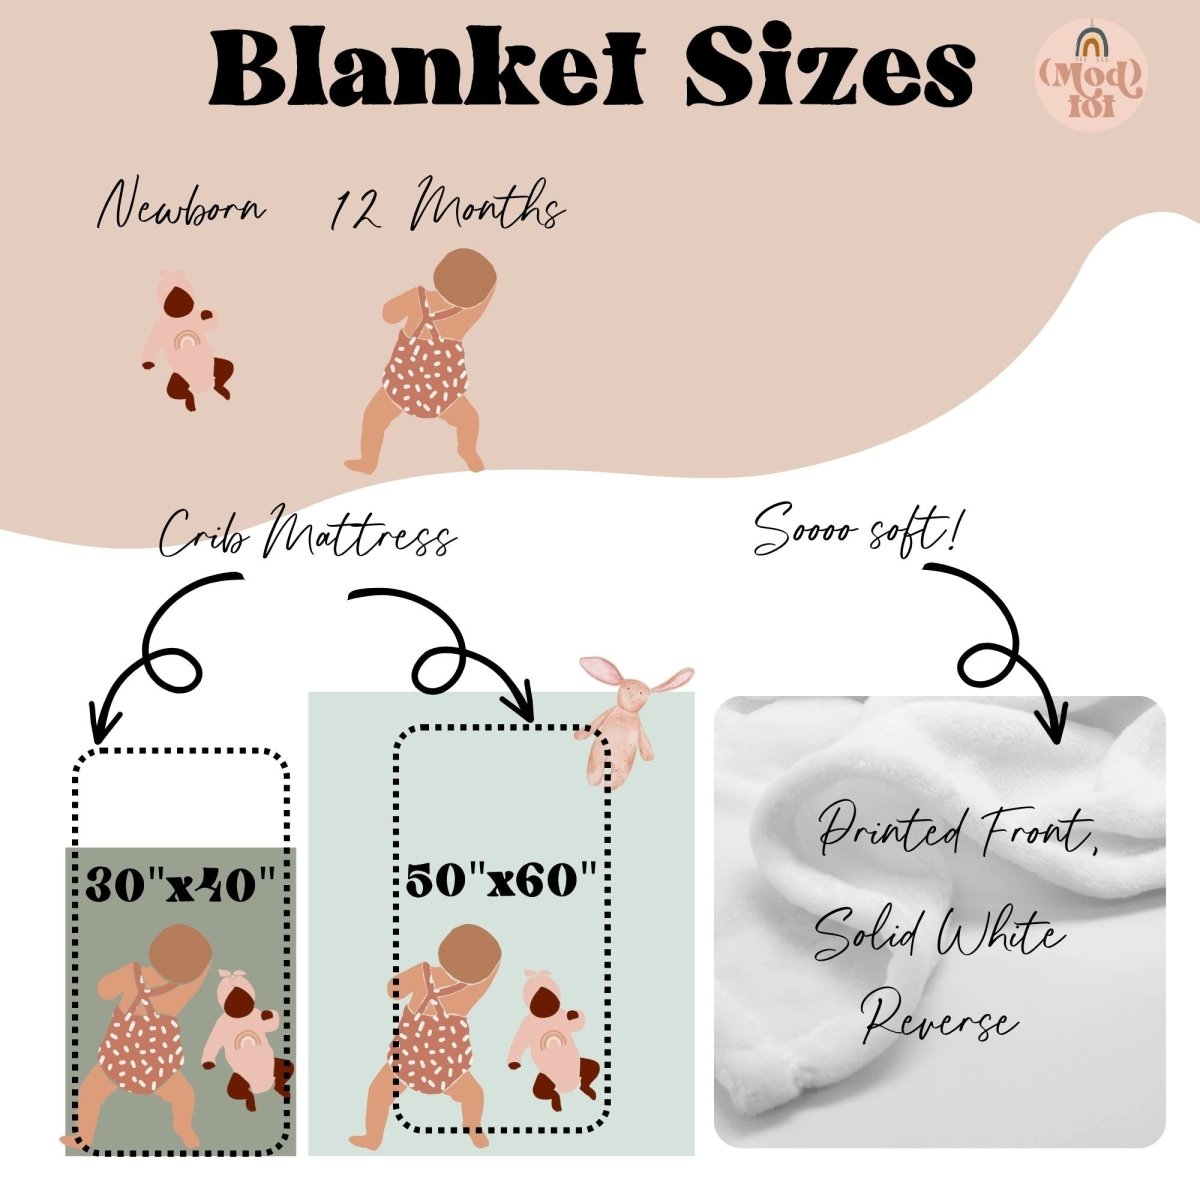 Farm Floral Calf Personalized Baby Blanket - Farm Floral, gender_girl, Personalized_Yes